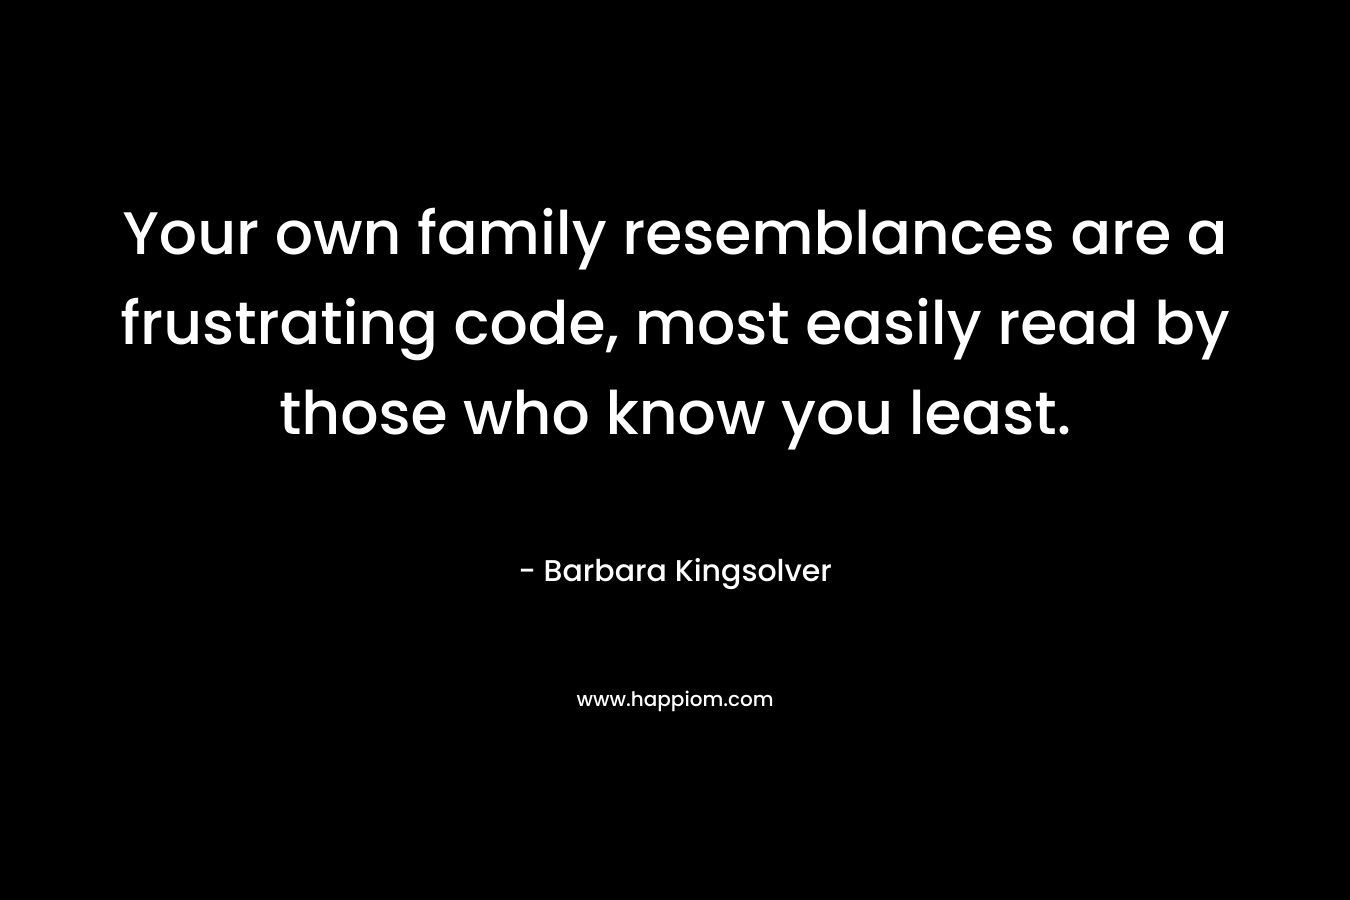 Your own family resemblances are a frustrating code, most easily read by those who know you least. – Barbara Kingsolver